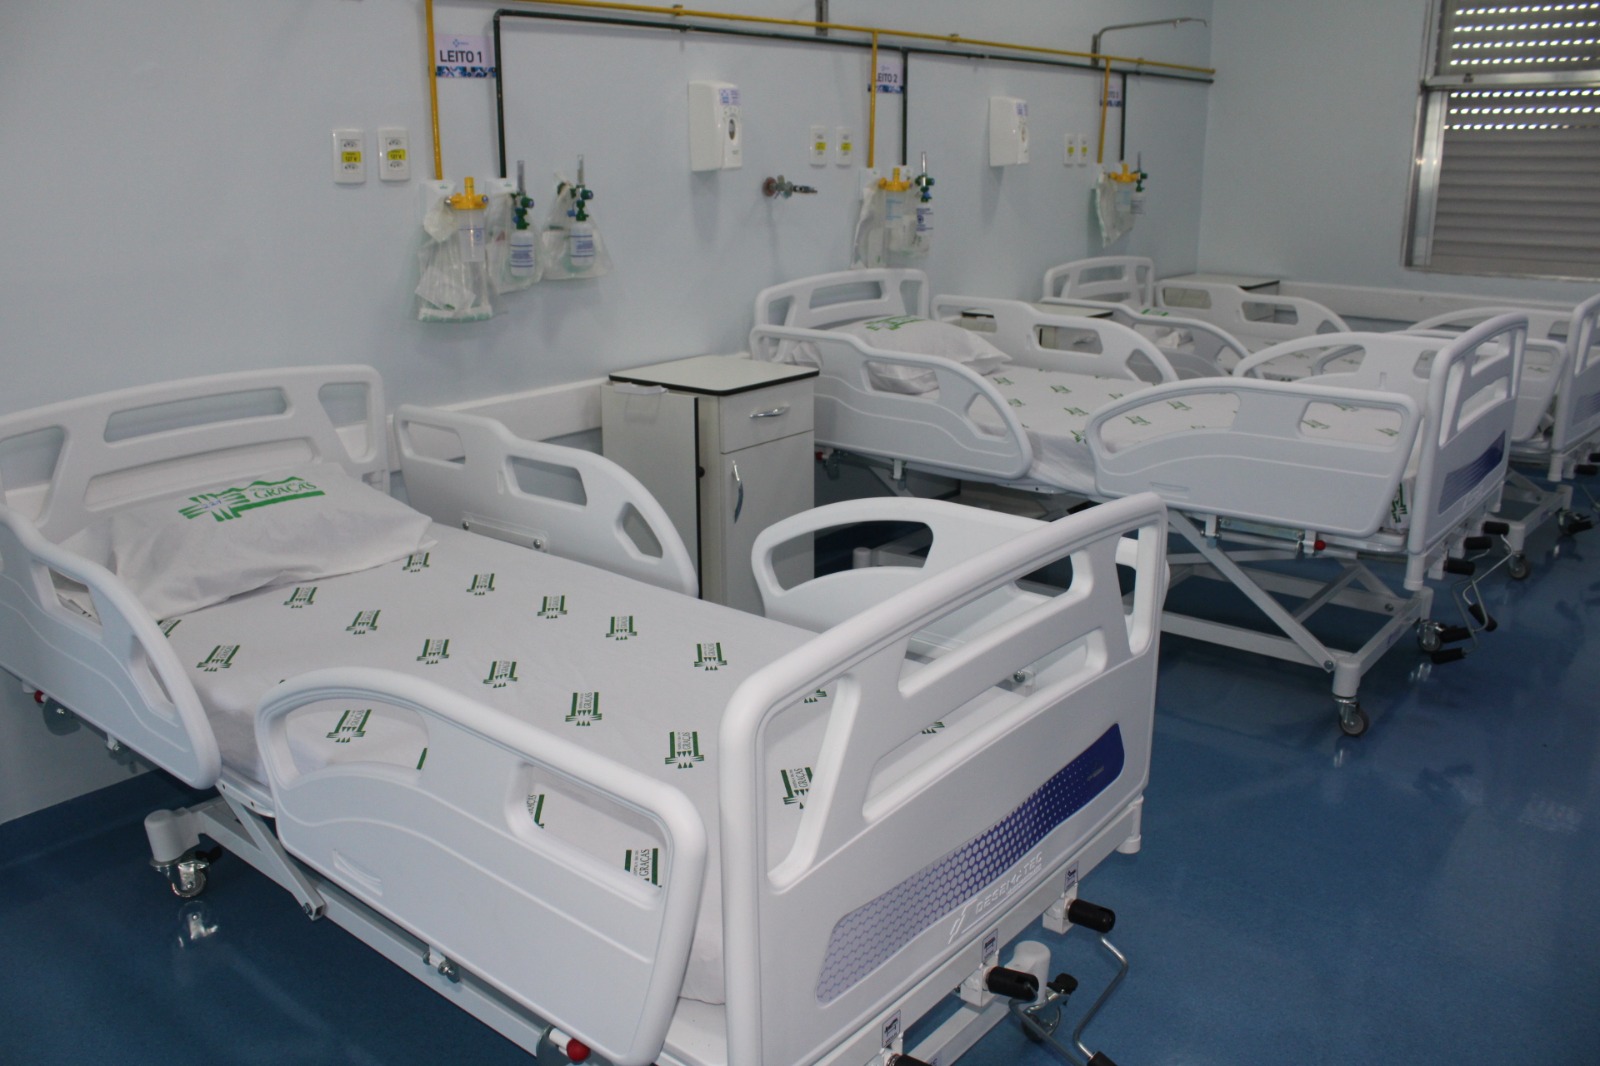 Kanwas: The hospital opens more than 30 new beds with 100% SUS capacity